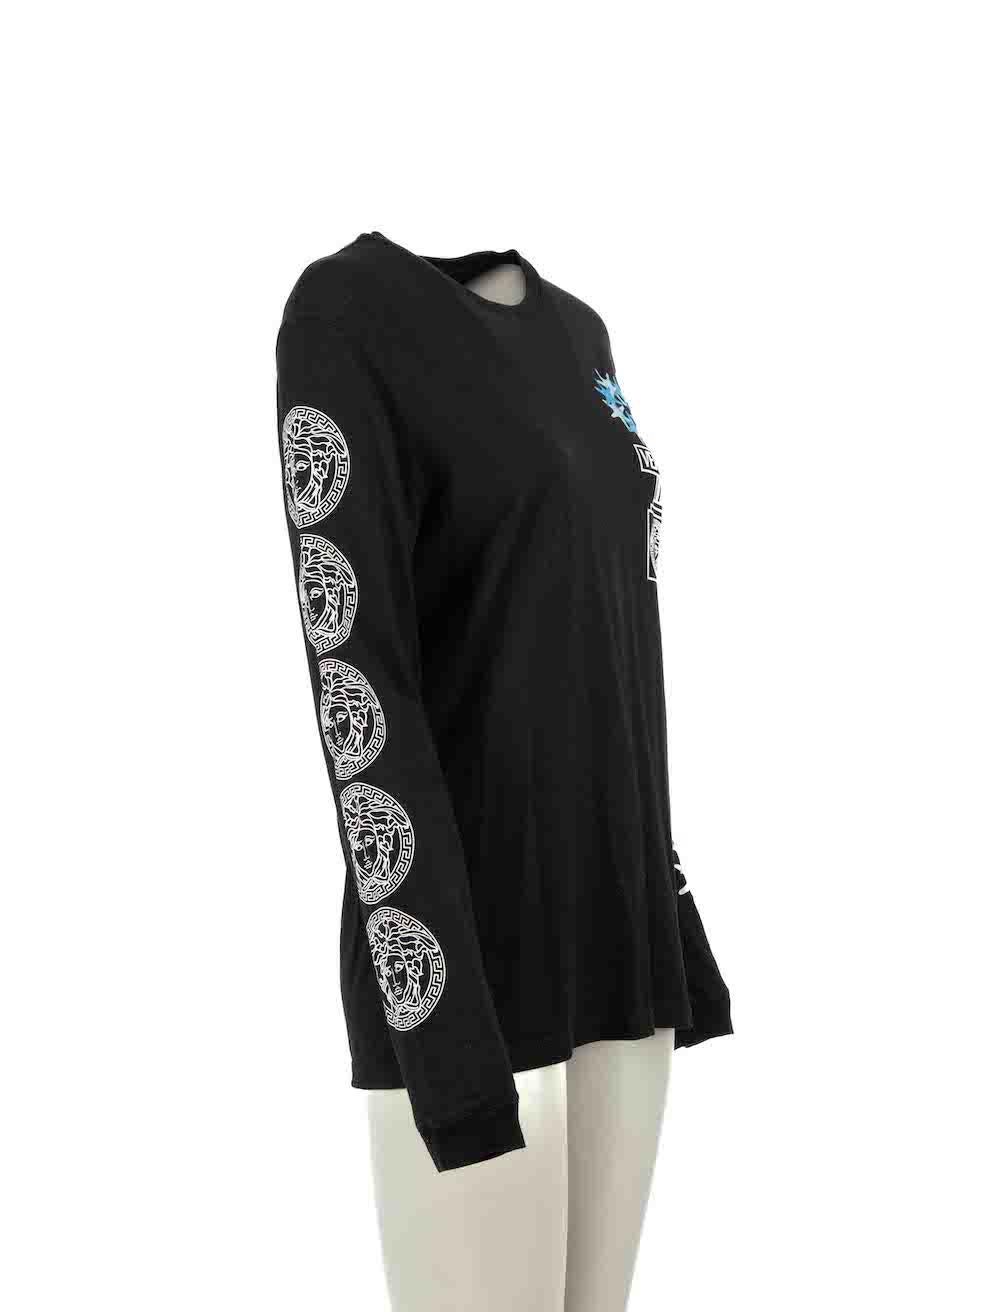 CONDITION is Very good. Hardly any visible wear to top is evident. Missing brand label on this used Versace designer resale item.
 
Details
Black
Cotton
Long sleeves top
Versacepolis graphic print pattern
Stretchy
Round neckline

Made in